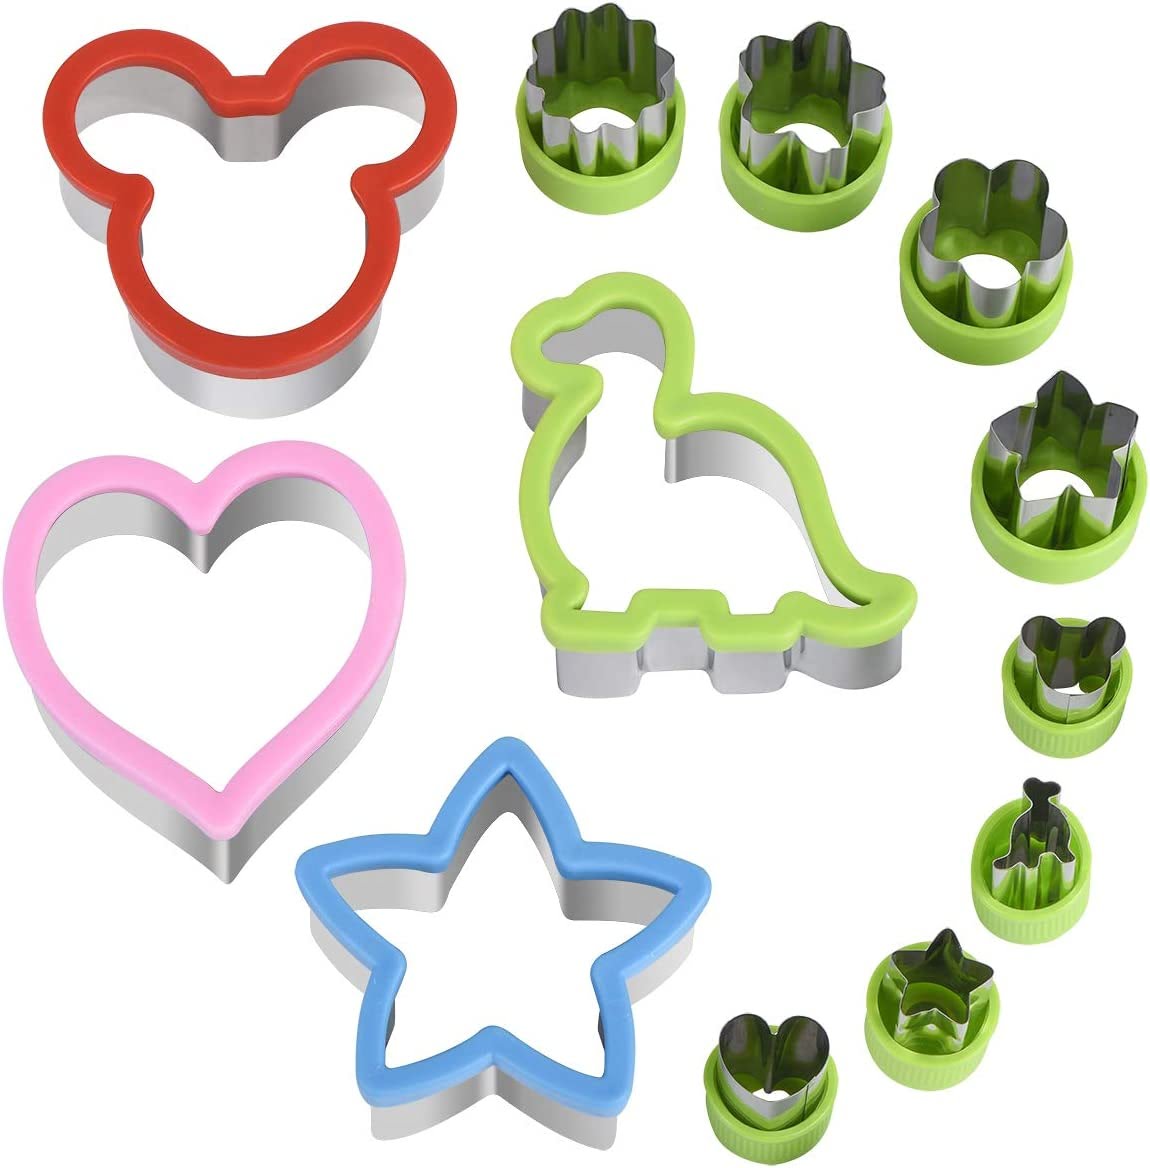 Kids Sandwich Cutters Set - Cookie, Vegetable, Fruits Shapes Food Mold